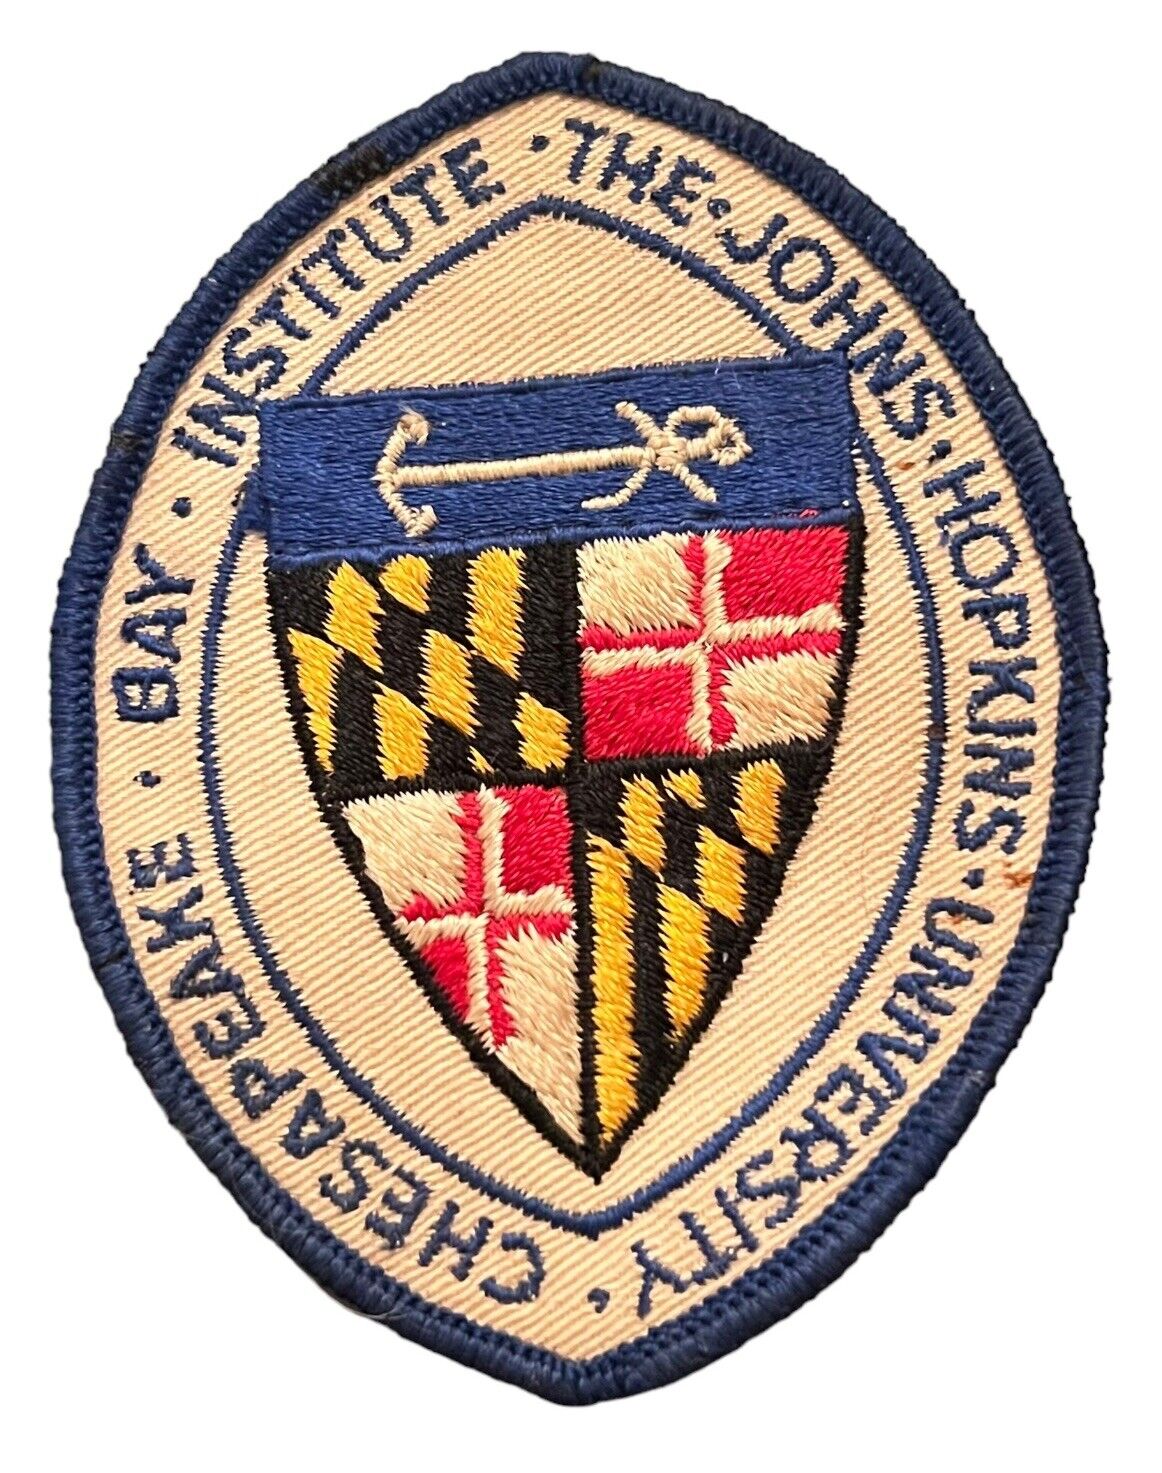 VTG PATCH THE JOHNS HOPKINS UNIVERSITY CHESAPEAKE BAY INSTITUTE Embroidered READ